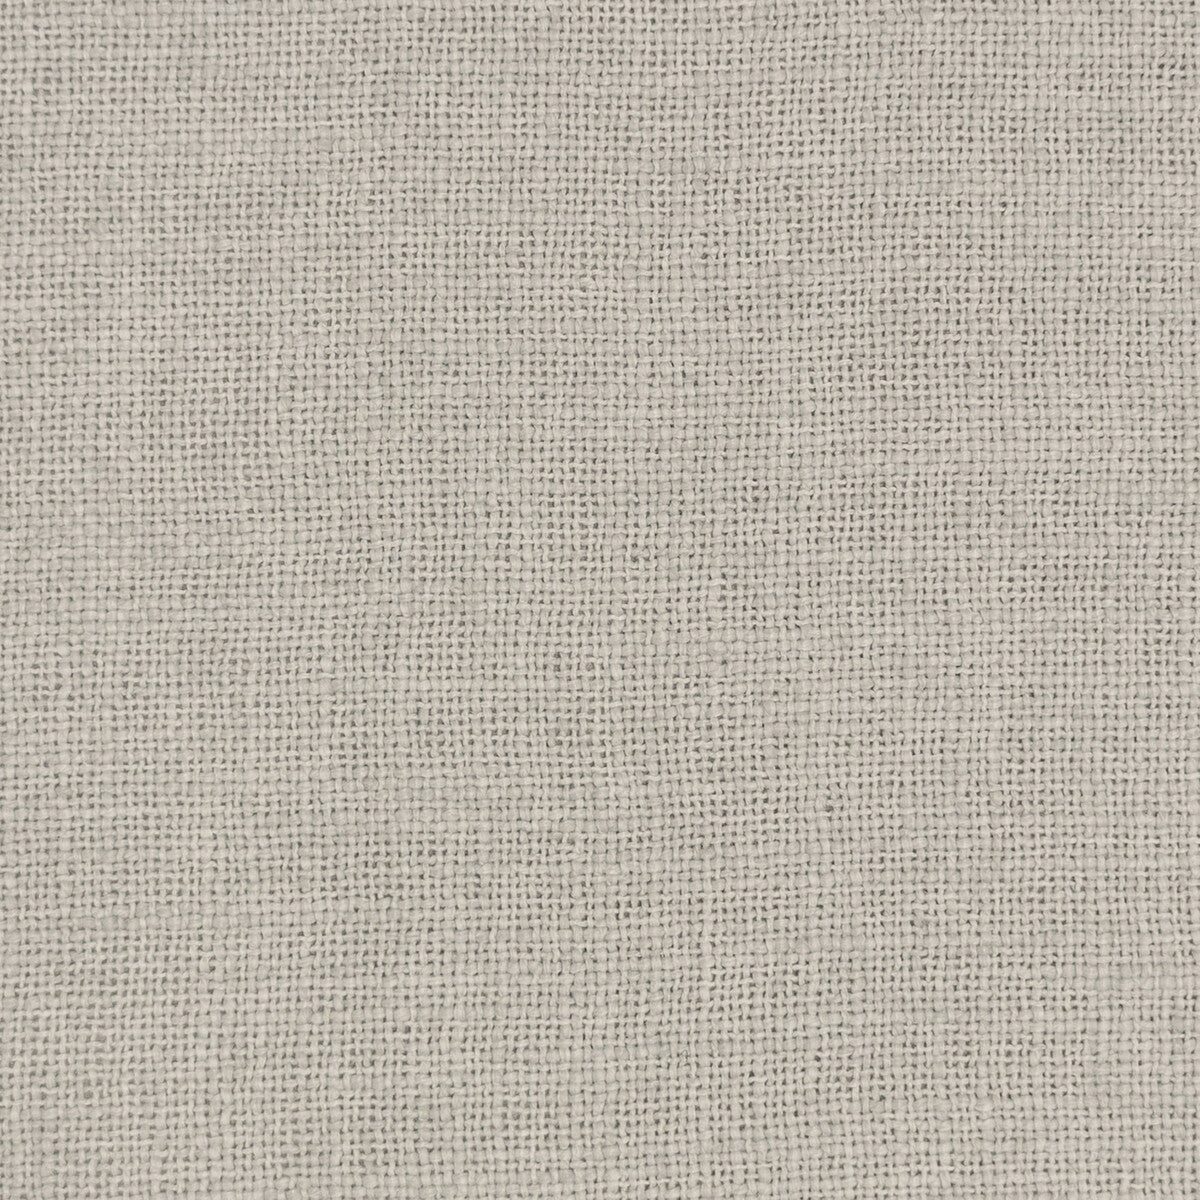 Bellver fabric in niebla color - pattern GDT5676.004.0 - by Gaston y Daniela in the Gaston Maiorica collection